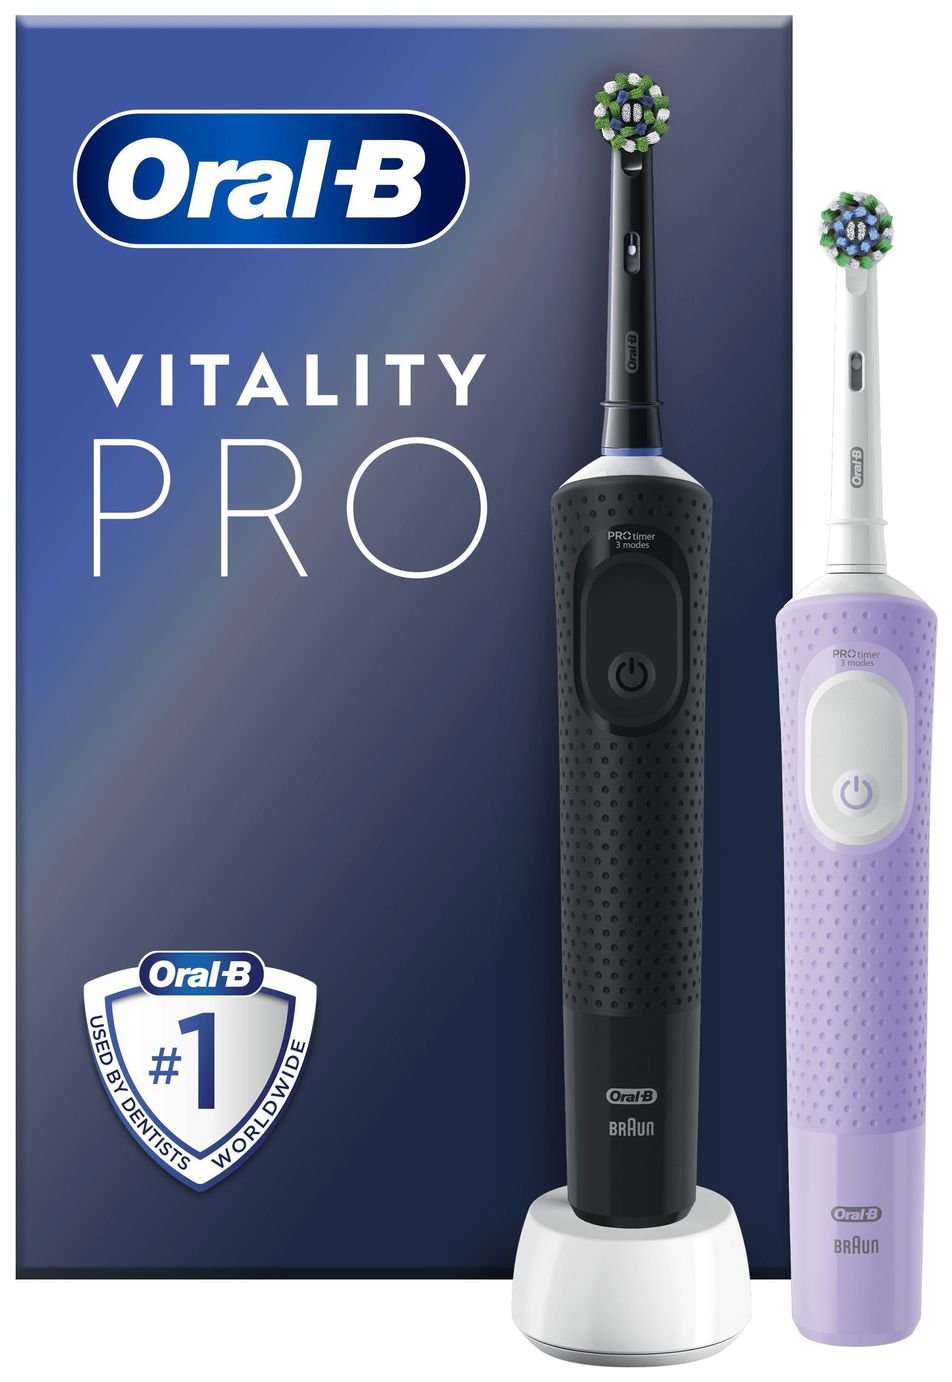 Oral-B Vitality Pro Electric Toothbrush - Duo Pack